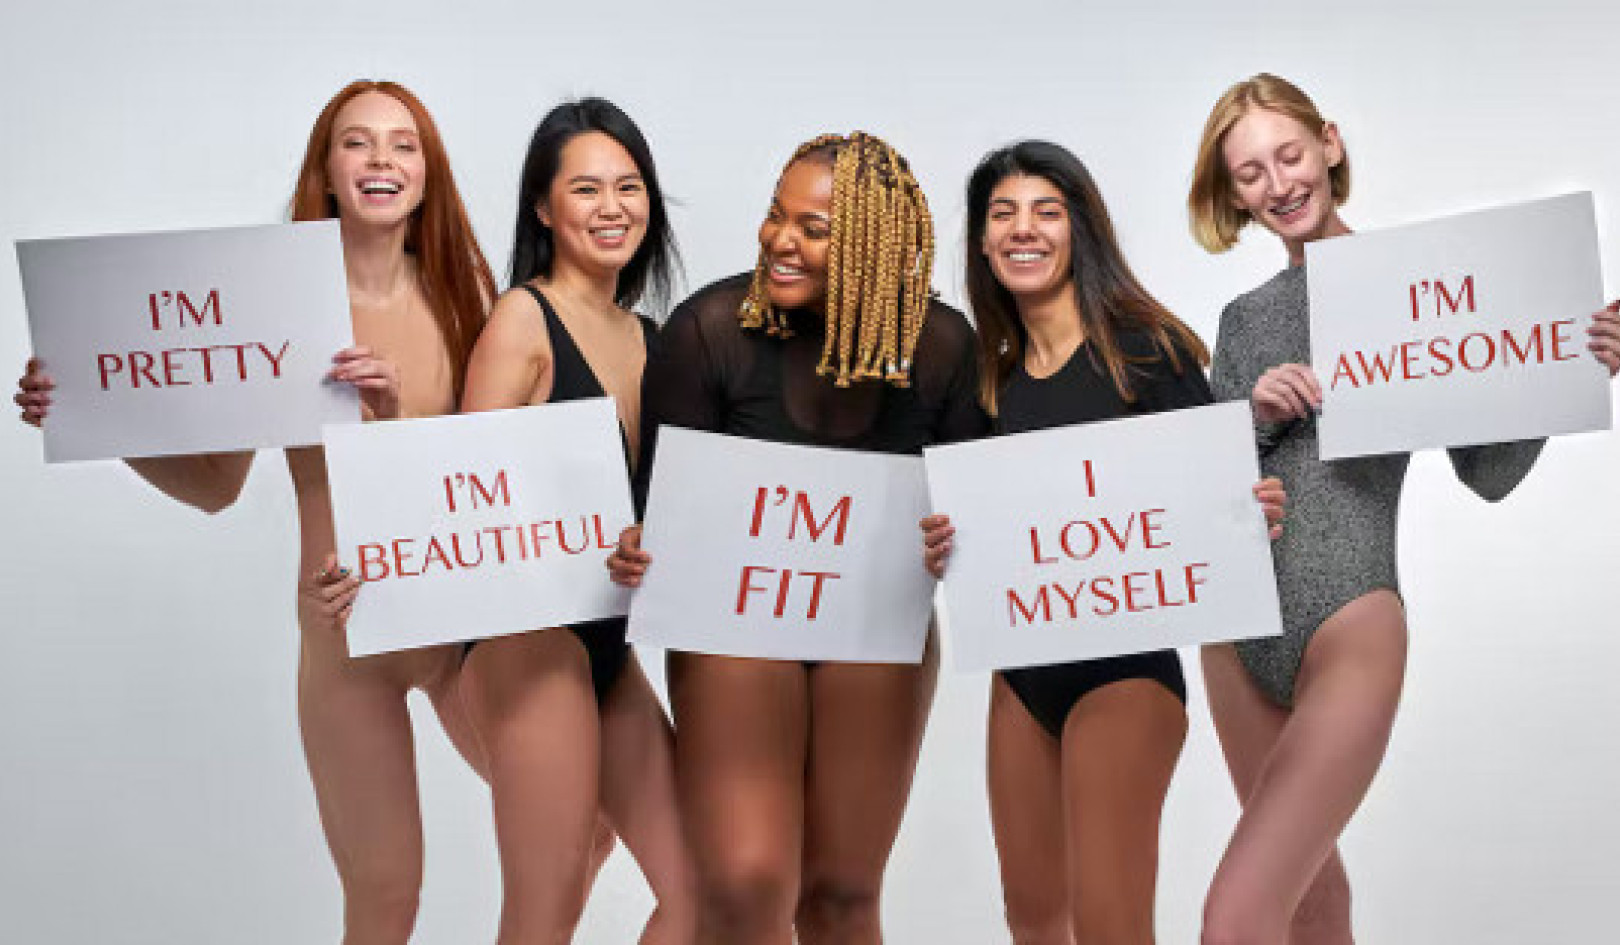 Why The Body Positivity Movement Risks Turning Toxic